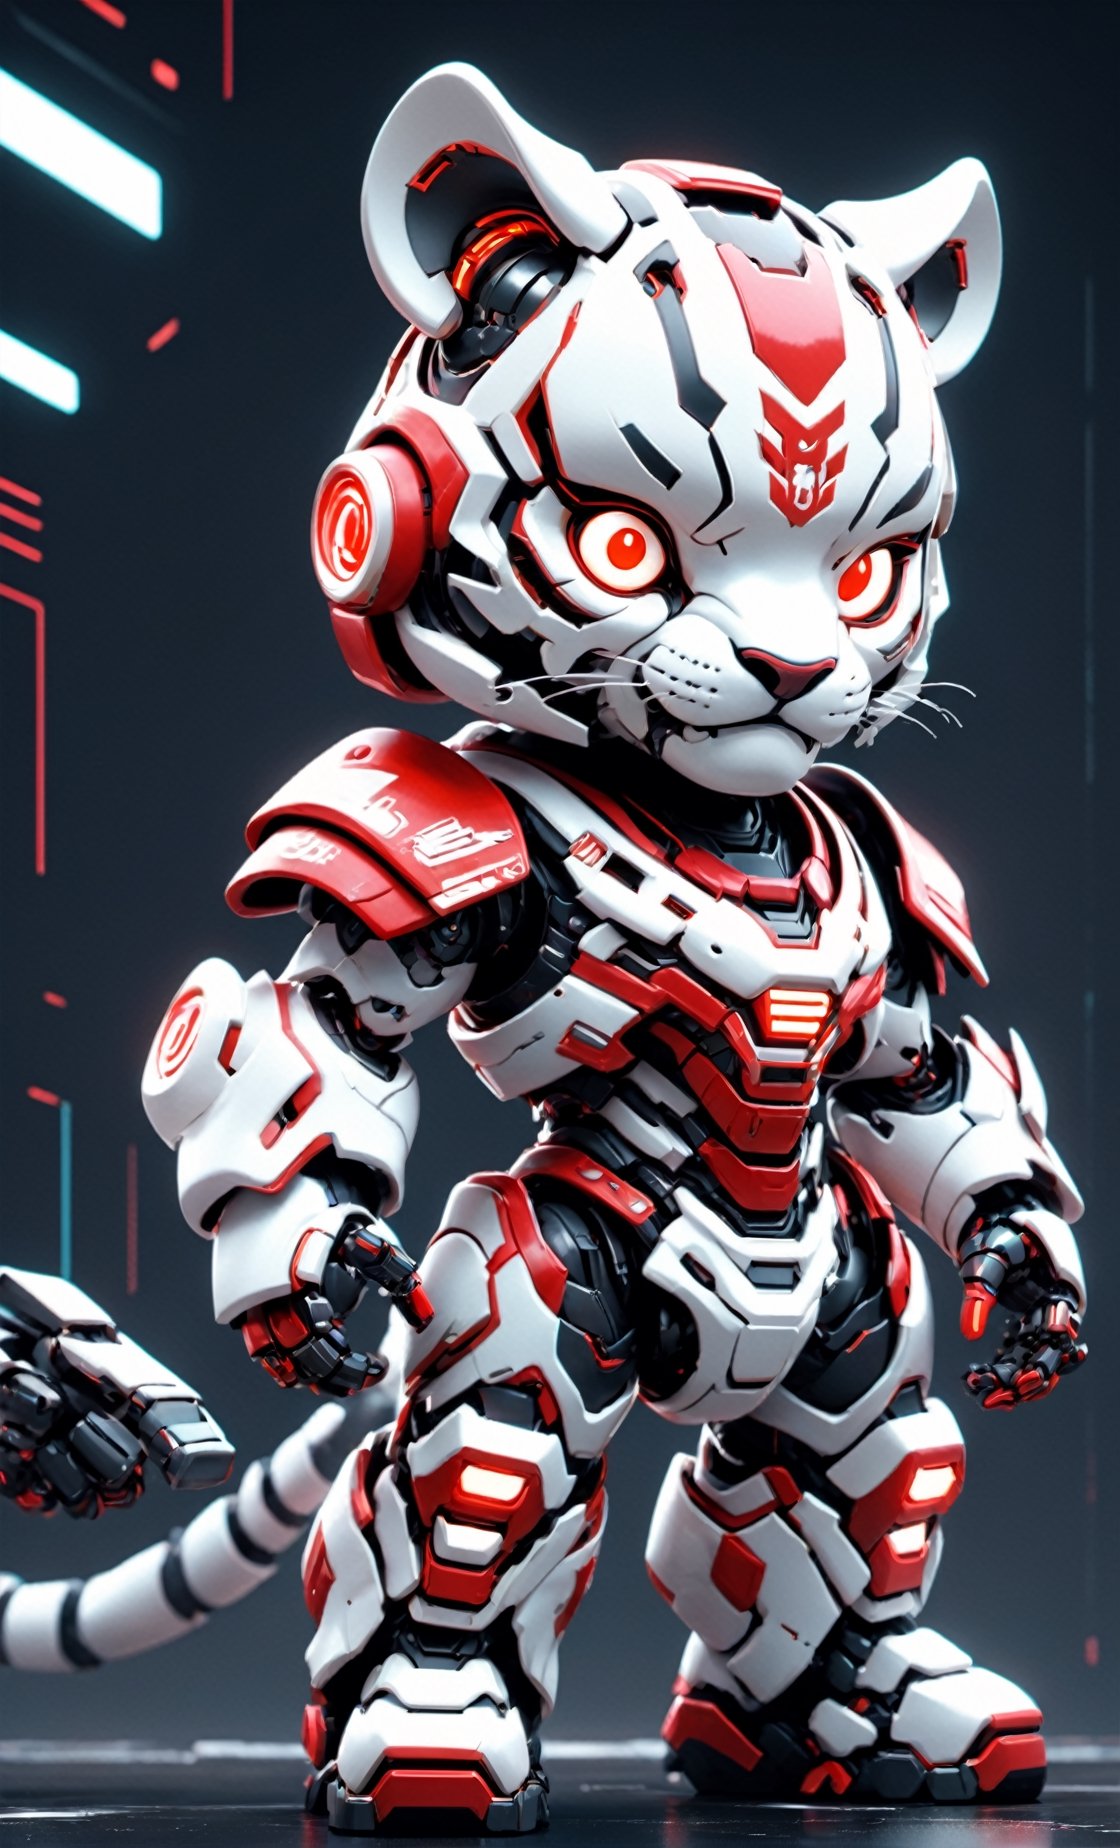 (masterpiece, best quality:1.5), EpicLogo, white armor, robot, red armor, white face, look on viewer, tiger style, central view, cute, hues, Movie Still, cyberpunk, full body, cinematic scene, intricate mech details, ground level shot, 8K resolution, Cinema 4D, Behance HD, polished metal, shiny, data, white background